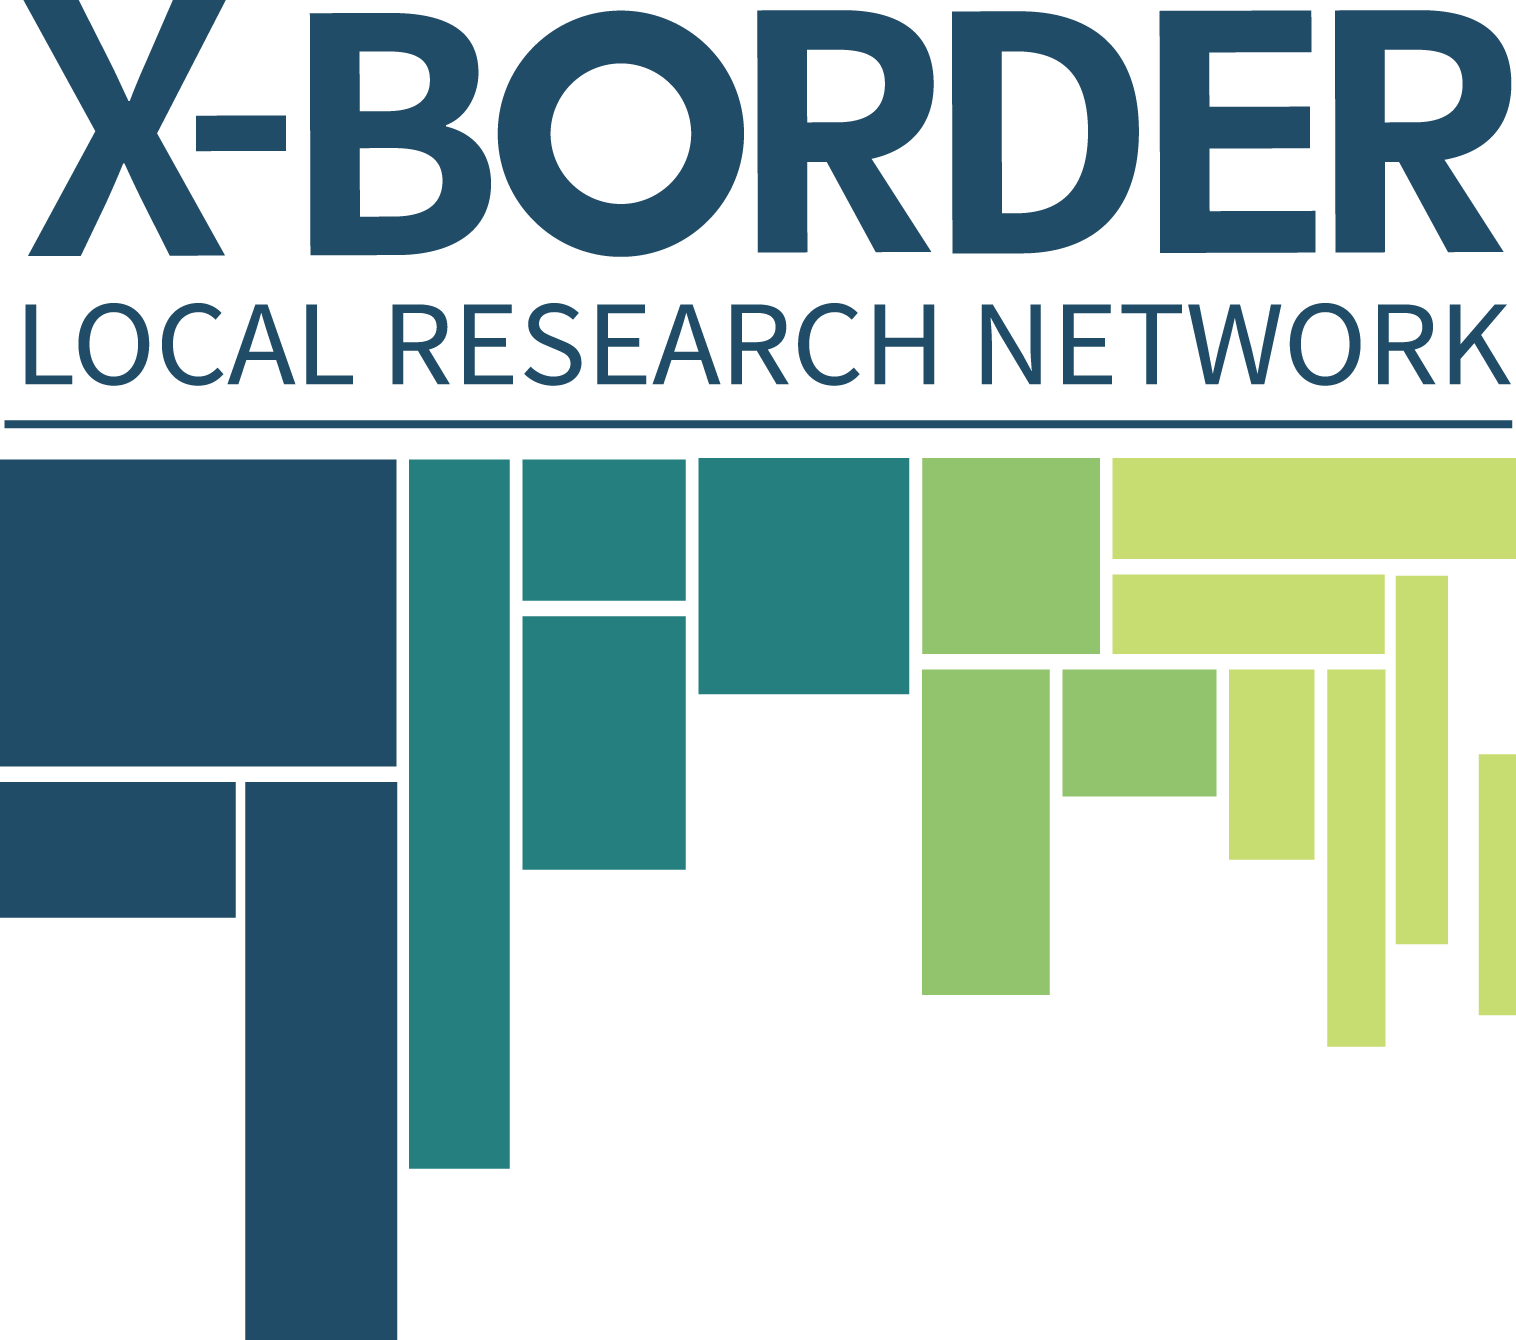 X-Border Local Research Network